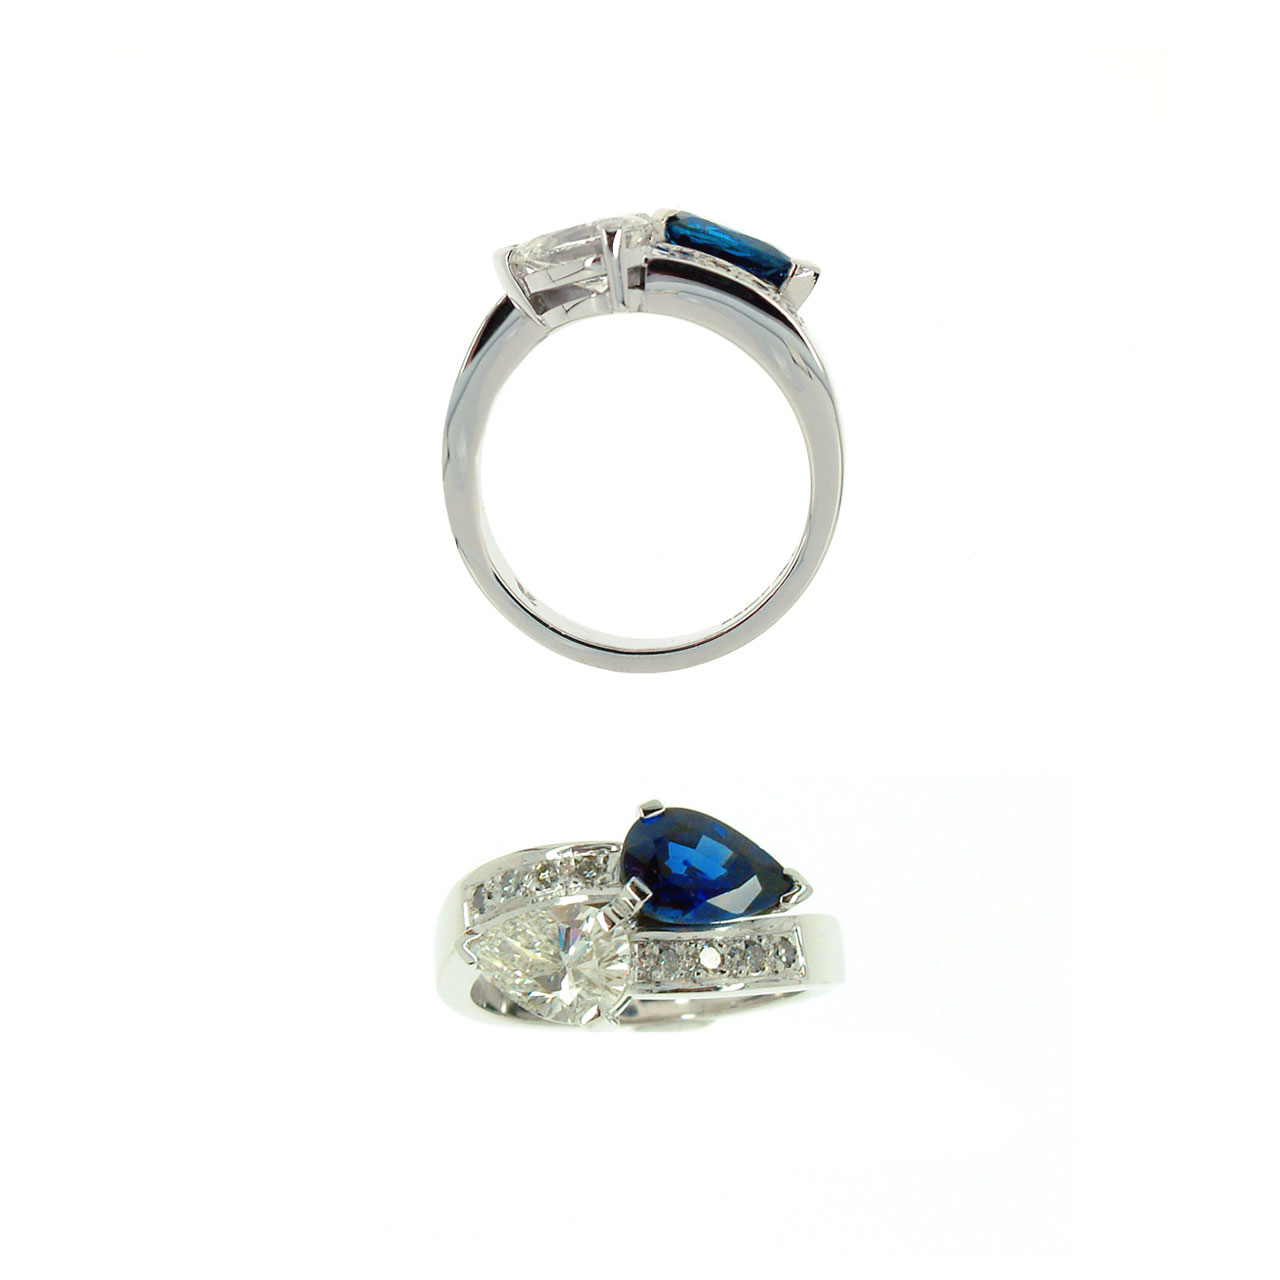 double headed pear shaped cross-over diamond and sapphire ring